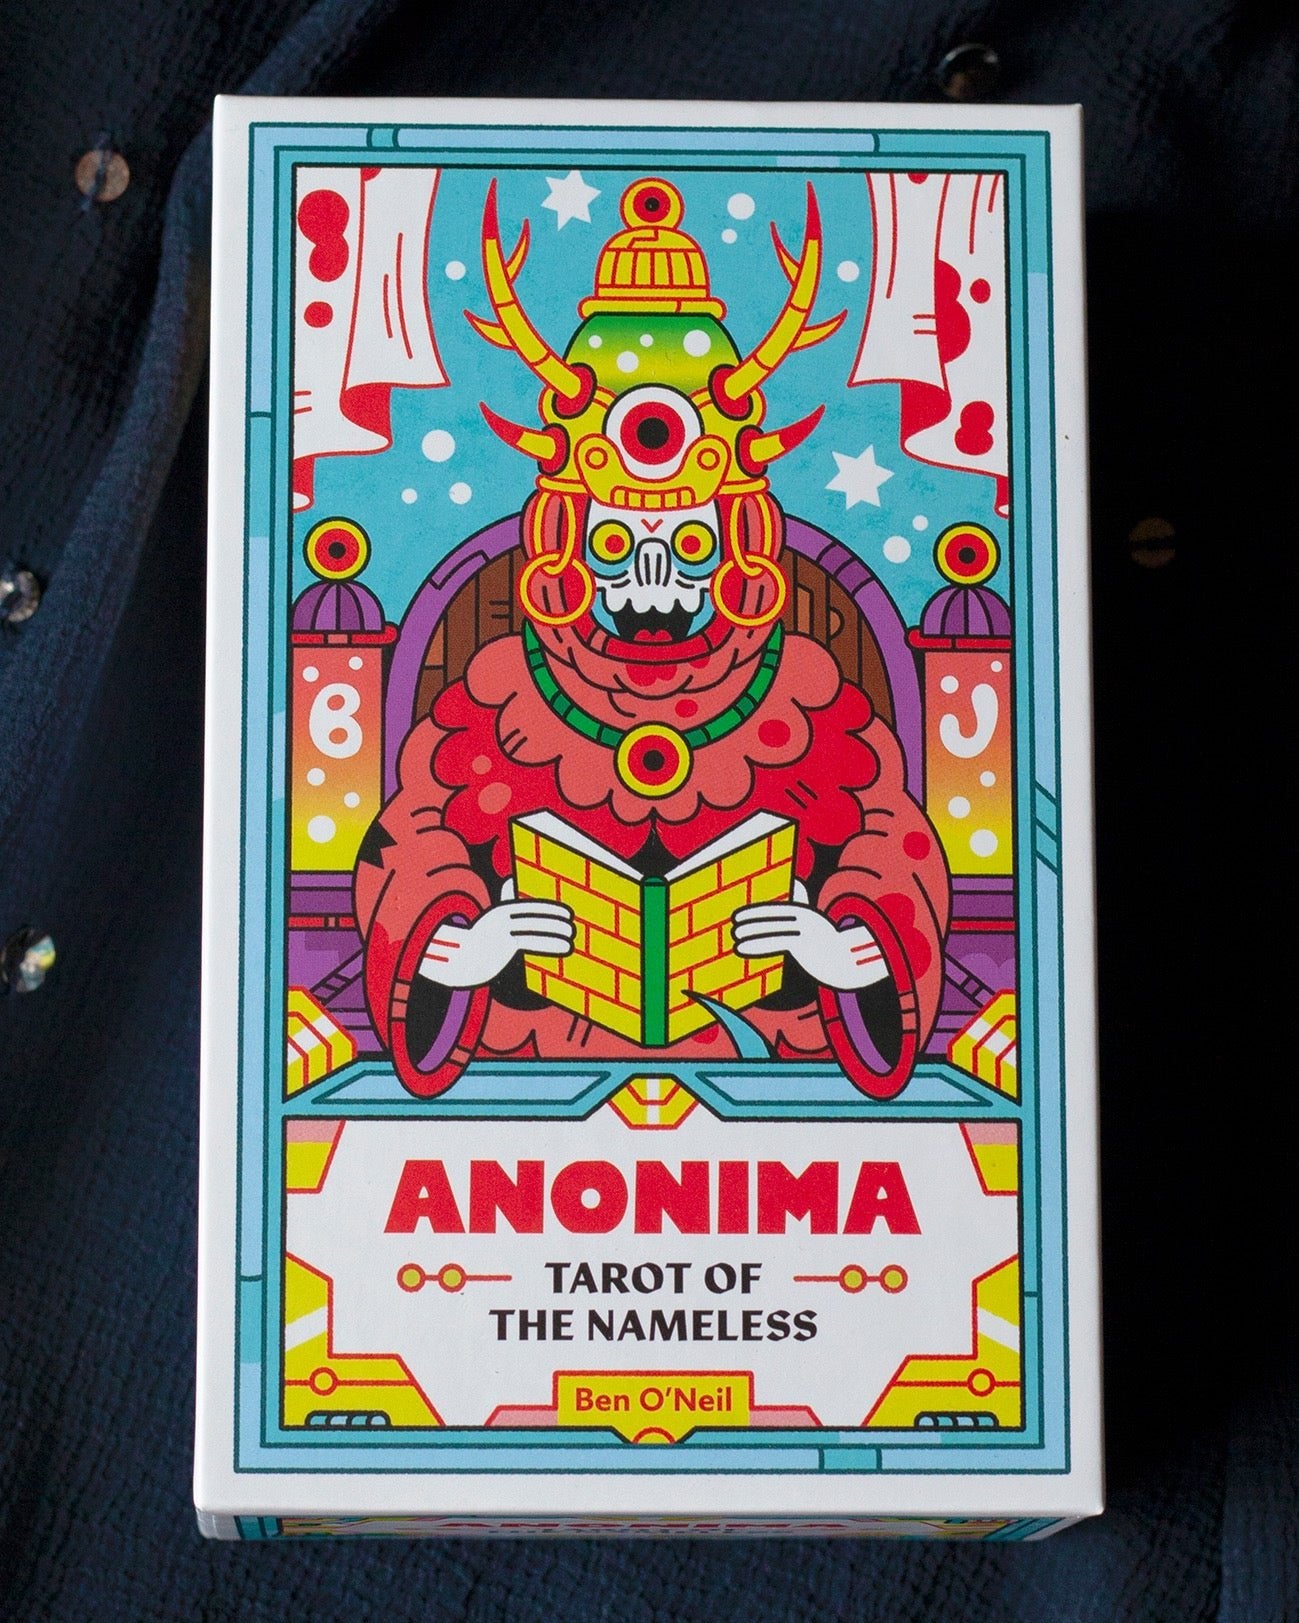 Mysterious Anonyma Tarot of the Nameless' - a deck of tarot cards with intricate, enigmatic illustrations.